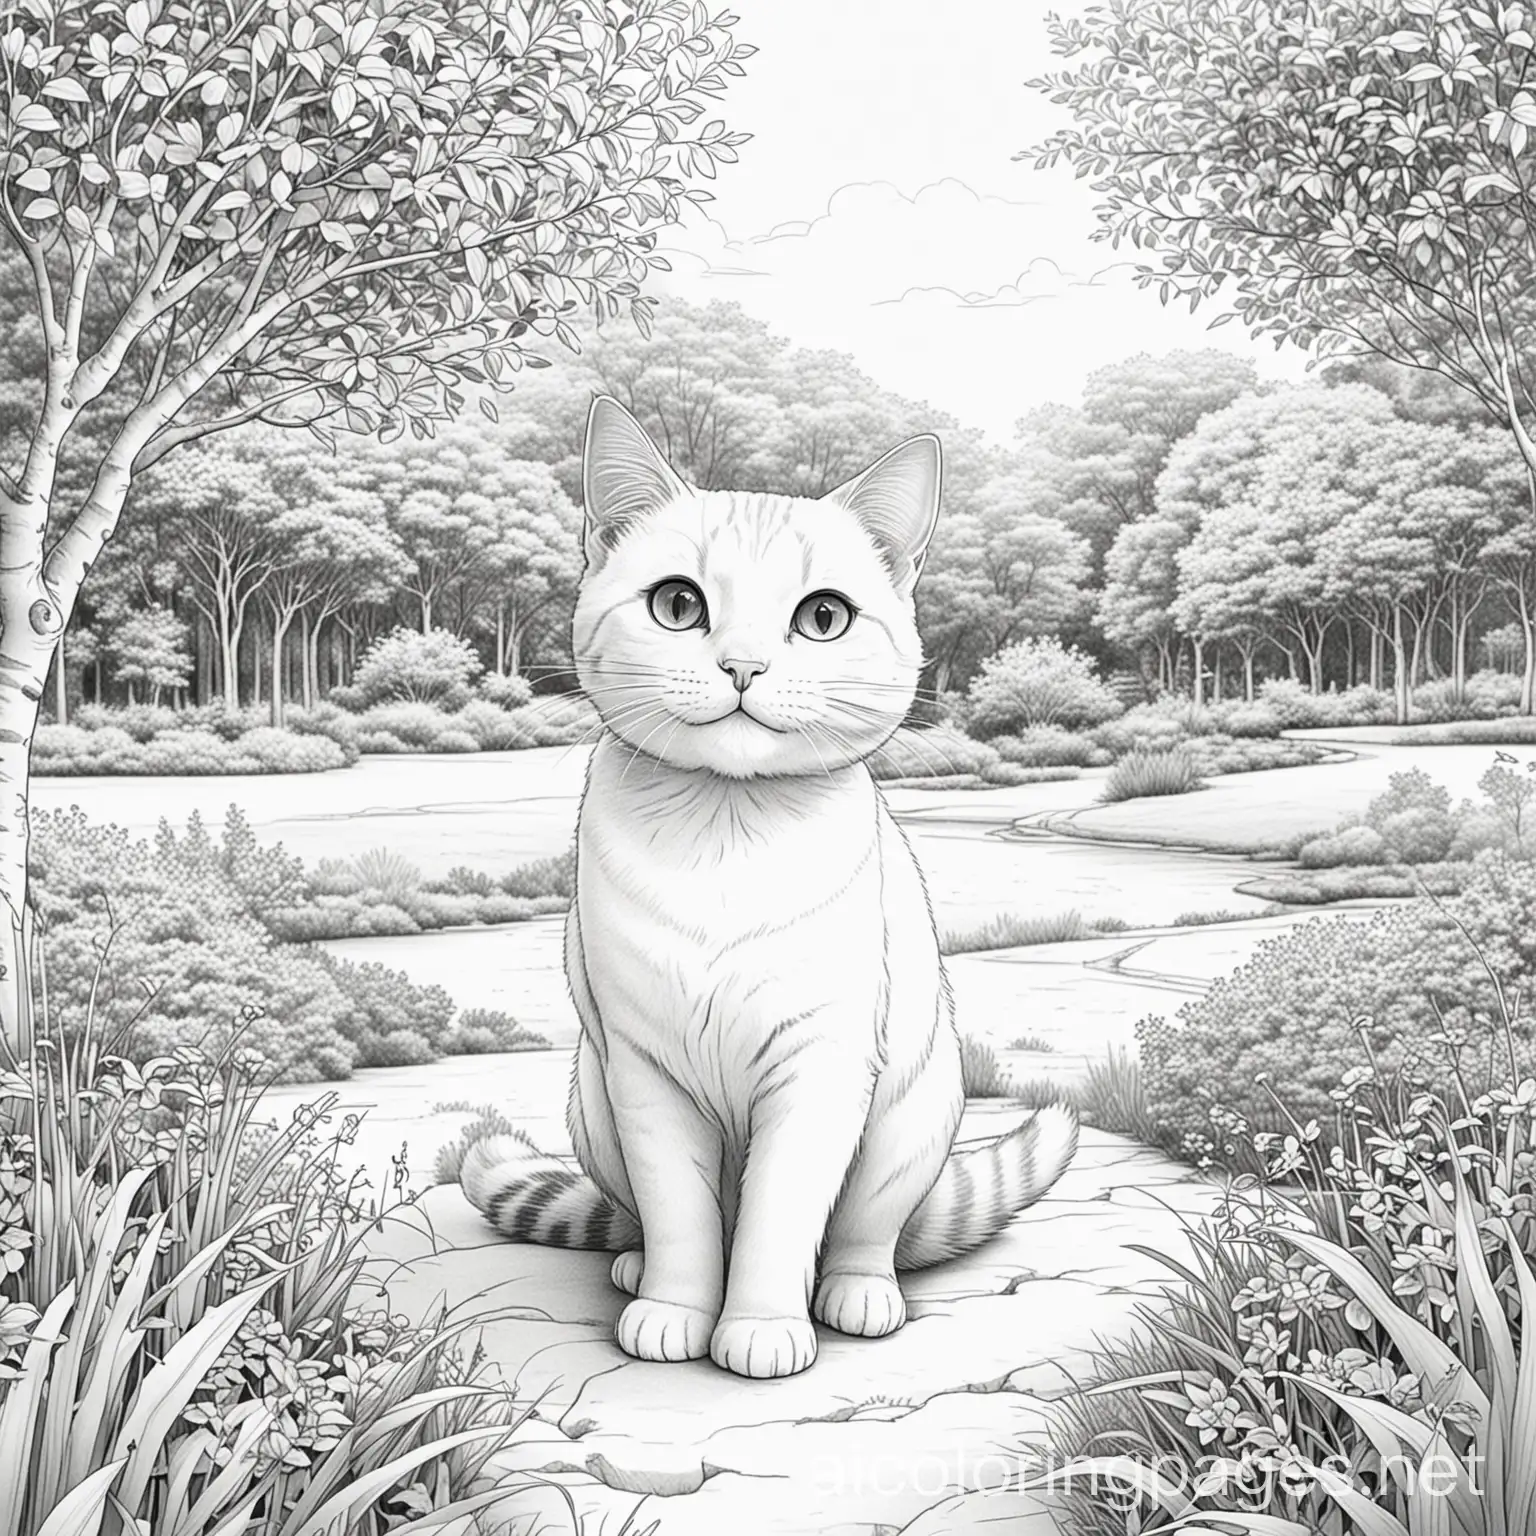 Happy cat in a park, Coloring Page, black and white, line art, white background, Simplicity, Ample White Space. The background of the coloring page is plain white to make it easy for young children to color within the lines. The outlines of all the subjects are easy to distinguish, making it simple for kids to color without too much difficulty